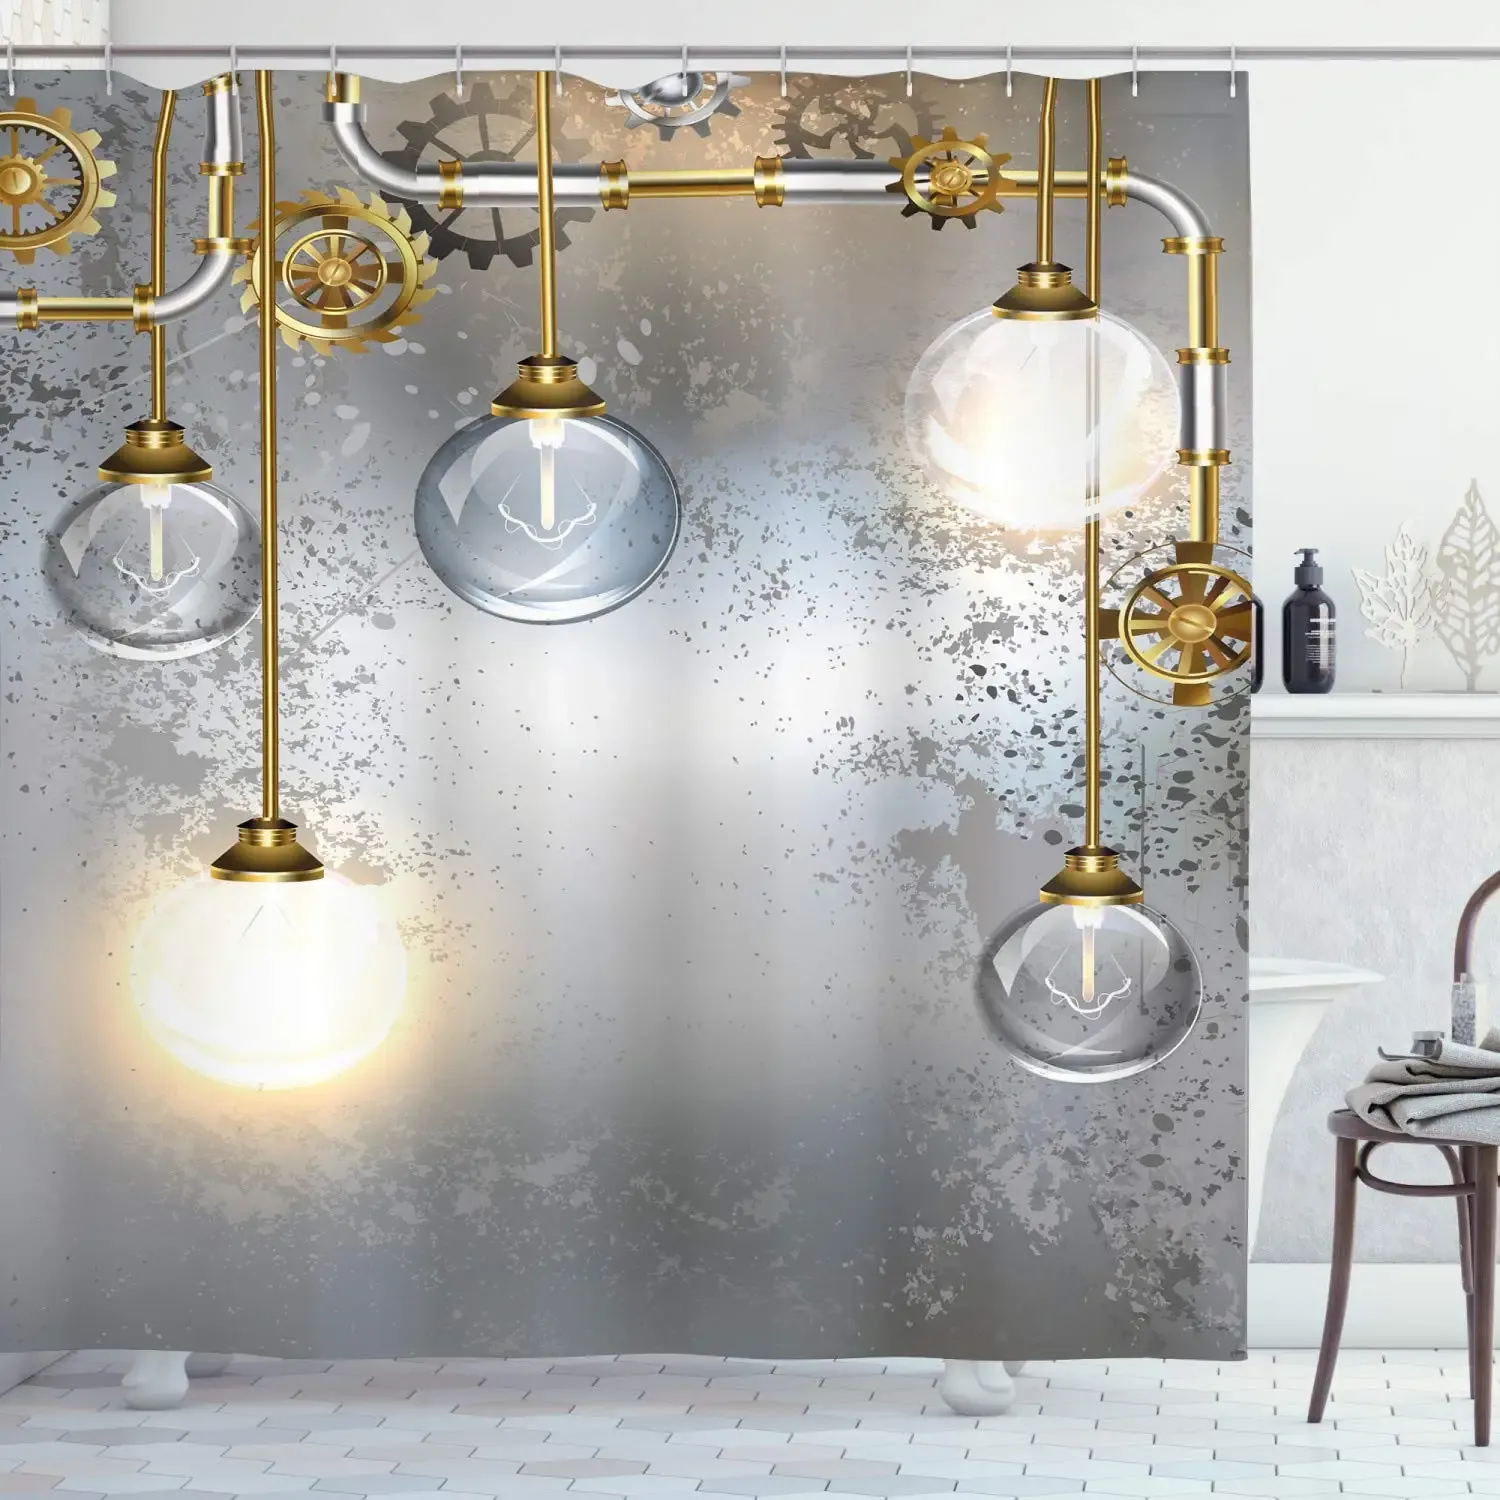 Curtains Industrial Shower Curtain, Steampunk Style Antique Composition Brass Fastening Round, Cloth Fabric Bathroom Decor Set with Hooks